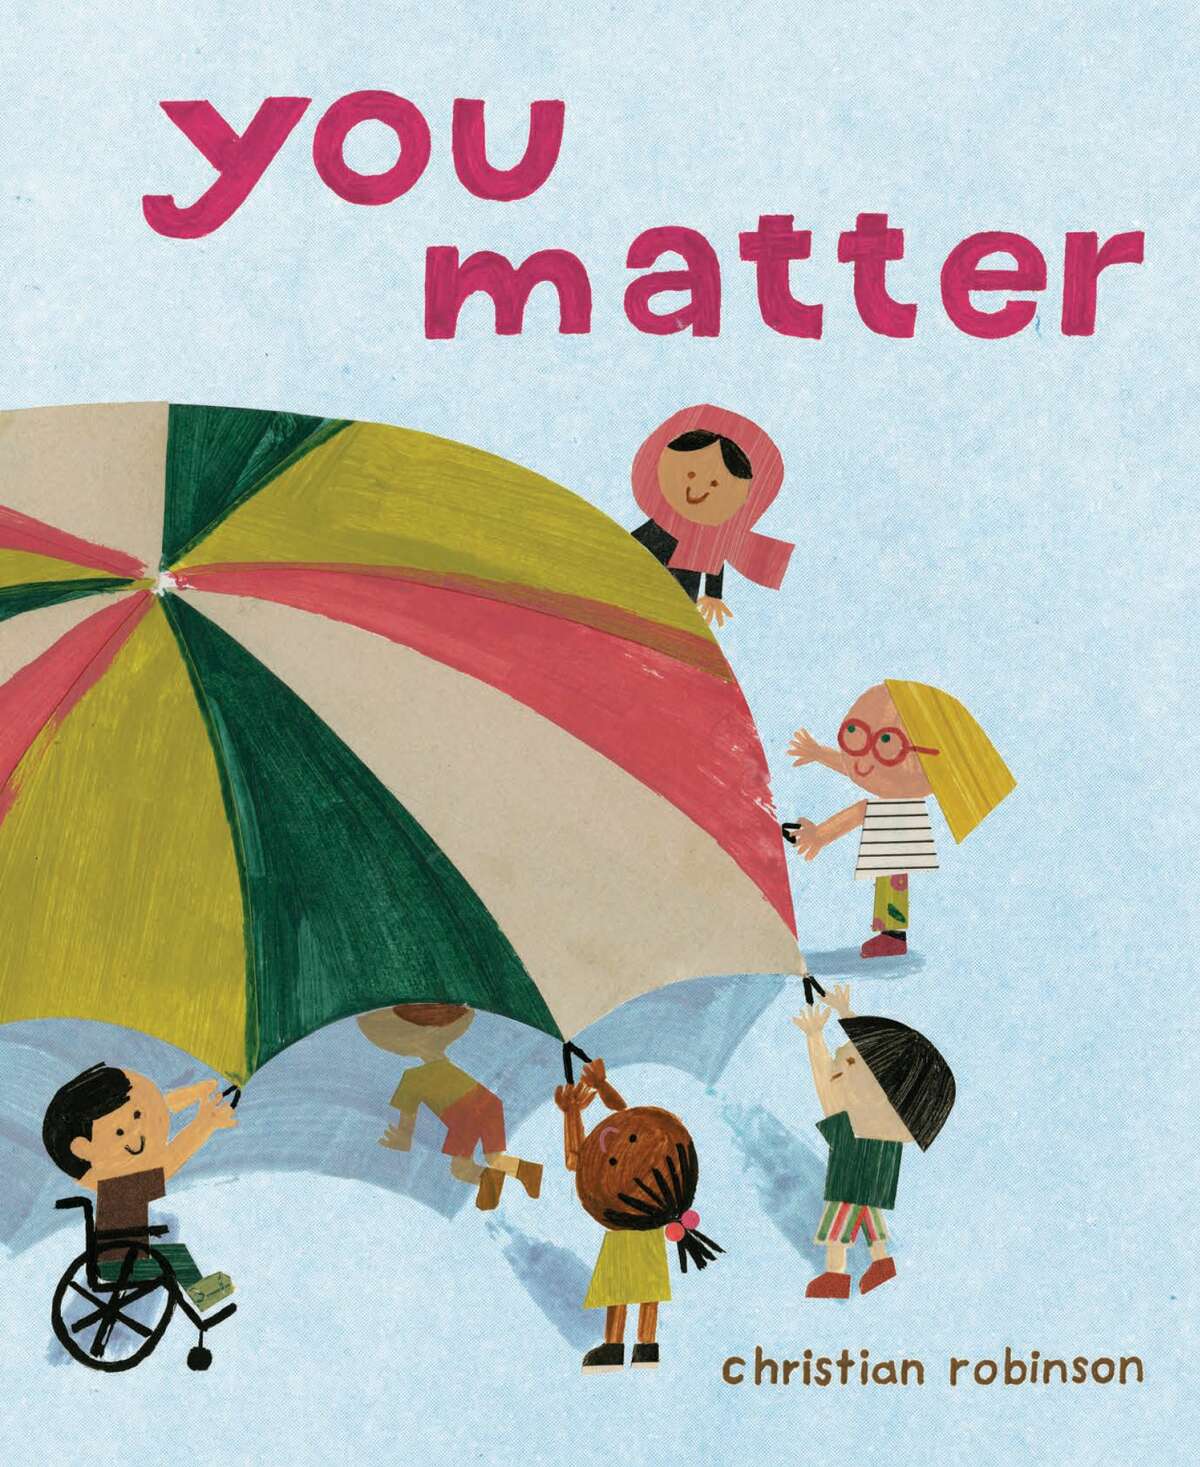 His newest book might be the most indicative of that premise. Originally slated to come out two months ago, “You Matter” — a children’s book about seeing the world from different points of view — instead launched this month. “We decided to release it on June 2, which ended up being Blackout Tuesday,” Robinson says, referring to the day when Instagram was flooded with people posting feed-filling black squares in support of Black Lives Matter. “I was just filled with doubt, I was just thinking about traveling for days and only selling a few books, and coming back with a cold and being exhausted — that was what I was used to sometimes. With this book, we released it, and it just came at a time when I’d like to believe people needed that message.” The book sold out in two days on Amazon. “I didn’t even know there was a temporarily out-of-stock option on Amazon,” Robinson admits.